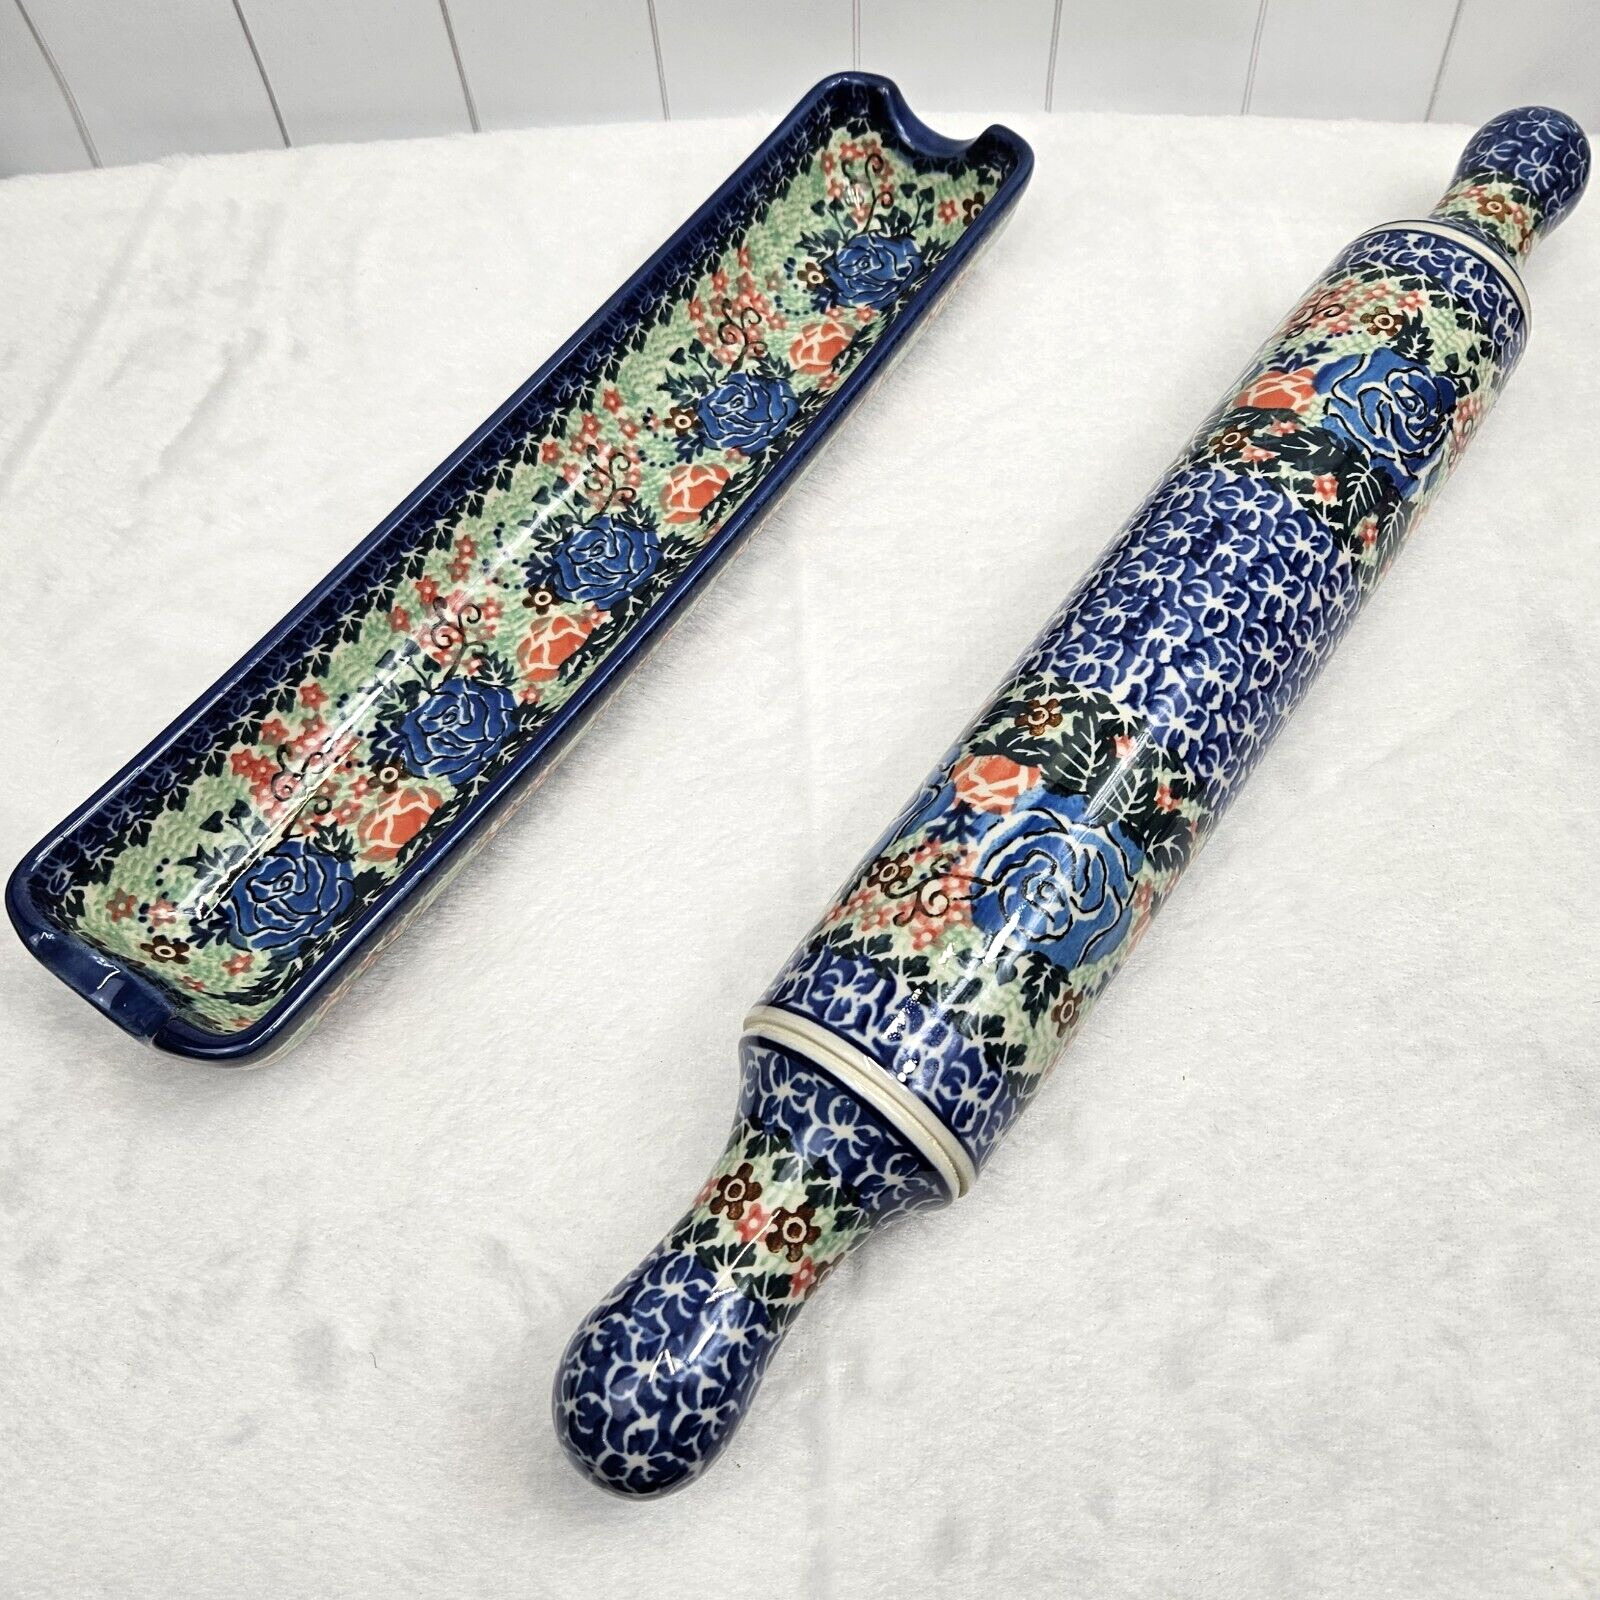 Hand Painted Polish Pottery Rolling Pin And Cradle UNIKAT Signature Blue Roses